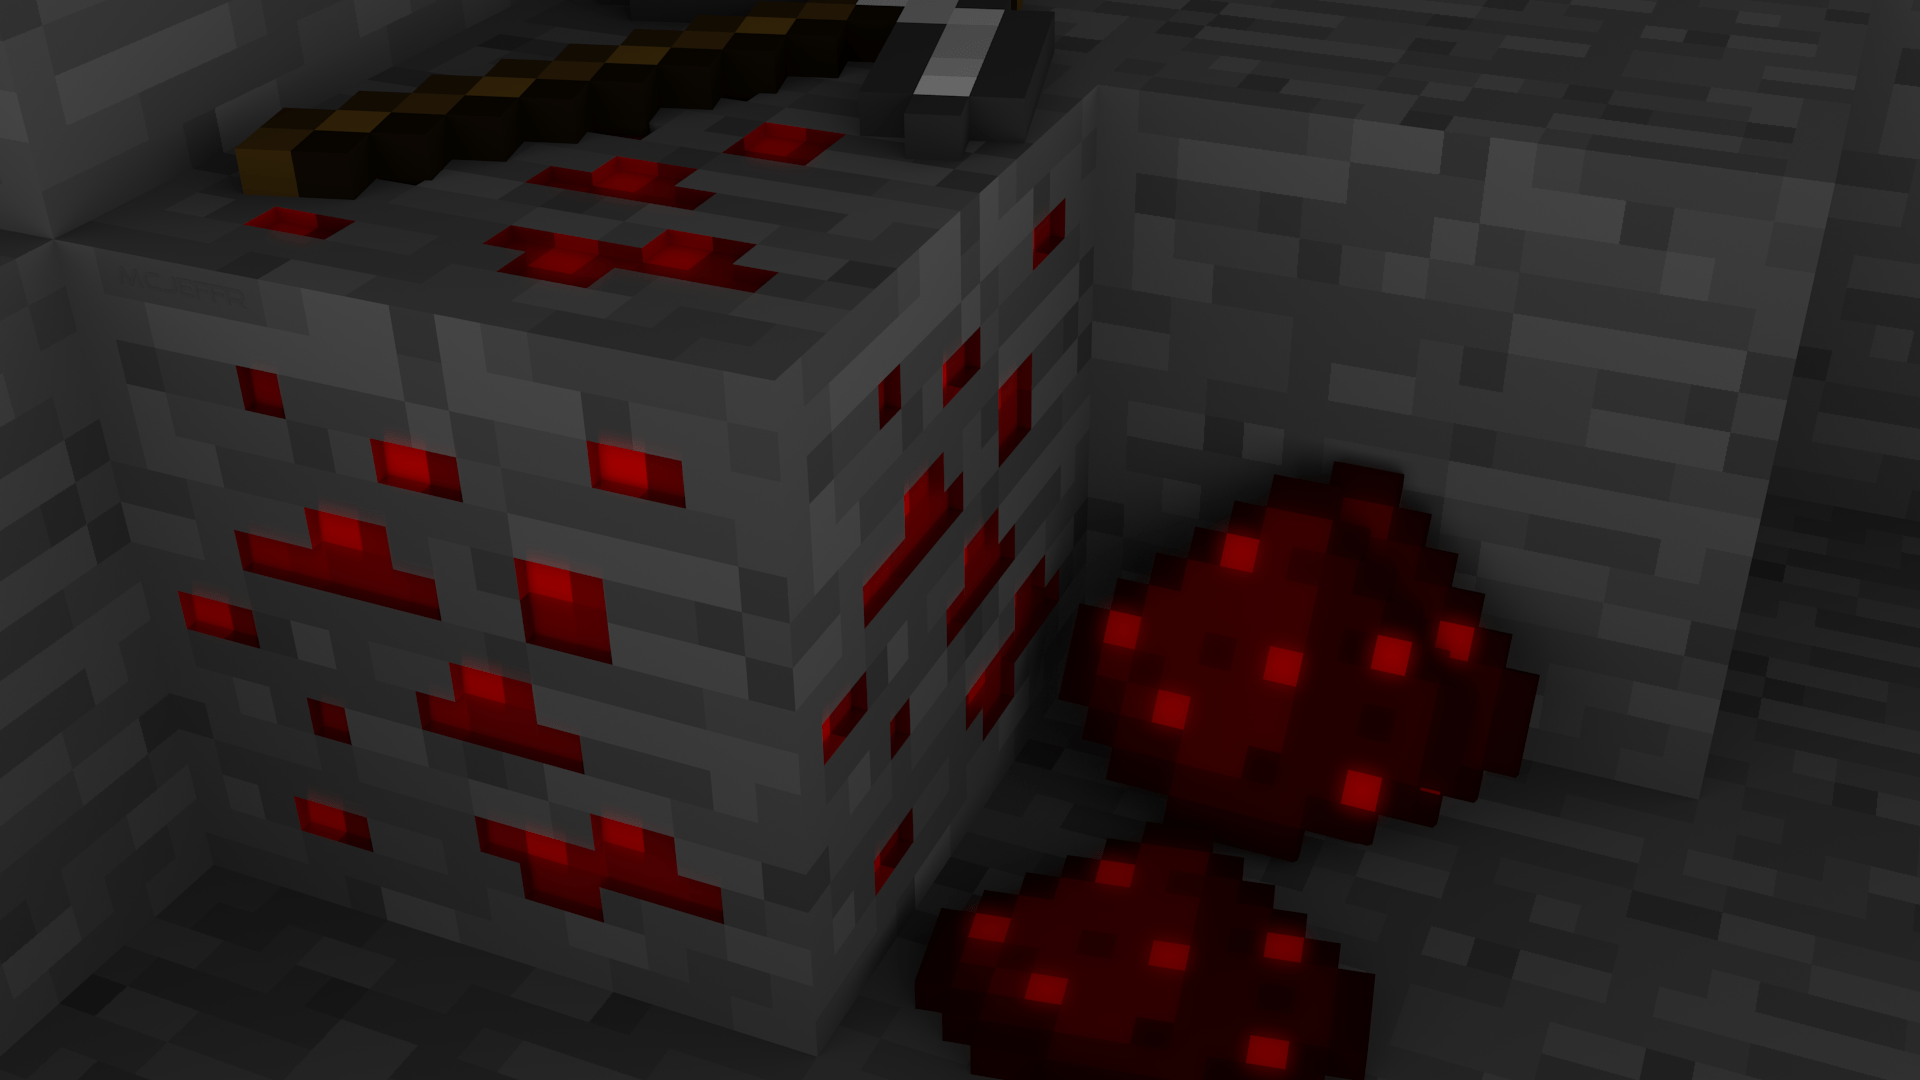 Red Stone 4K HD Minecraft Wallpapers  HD Wallpapers  ID 51096